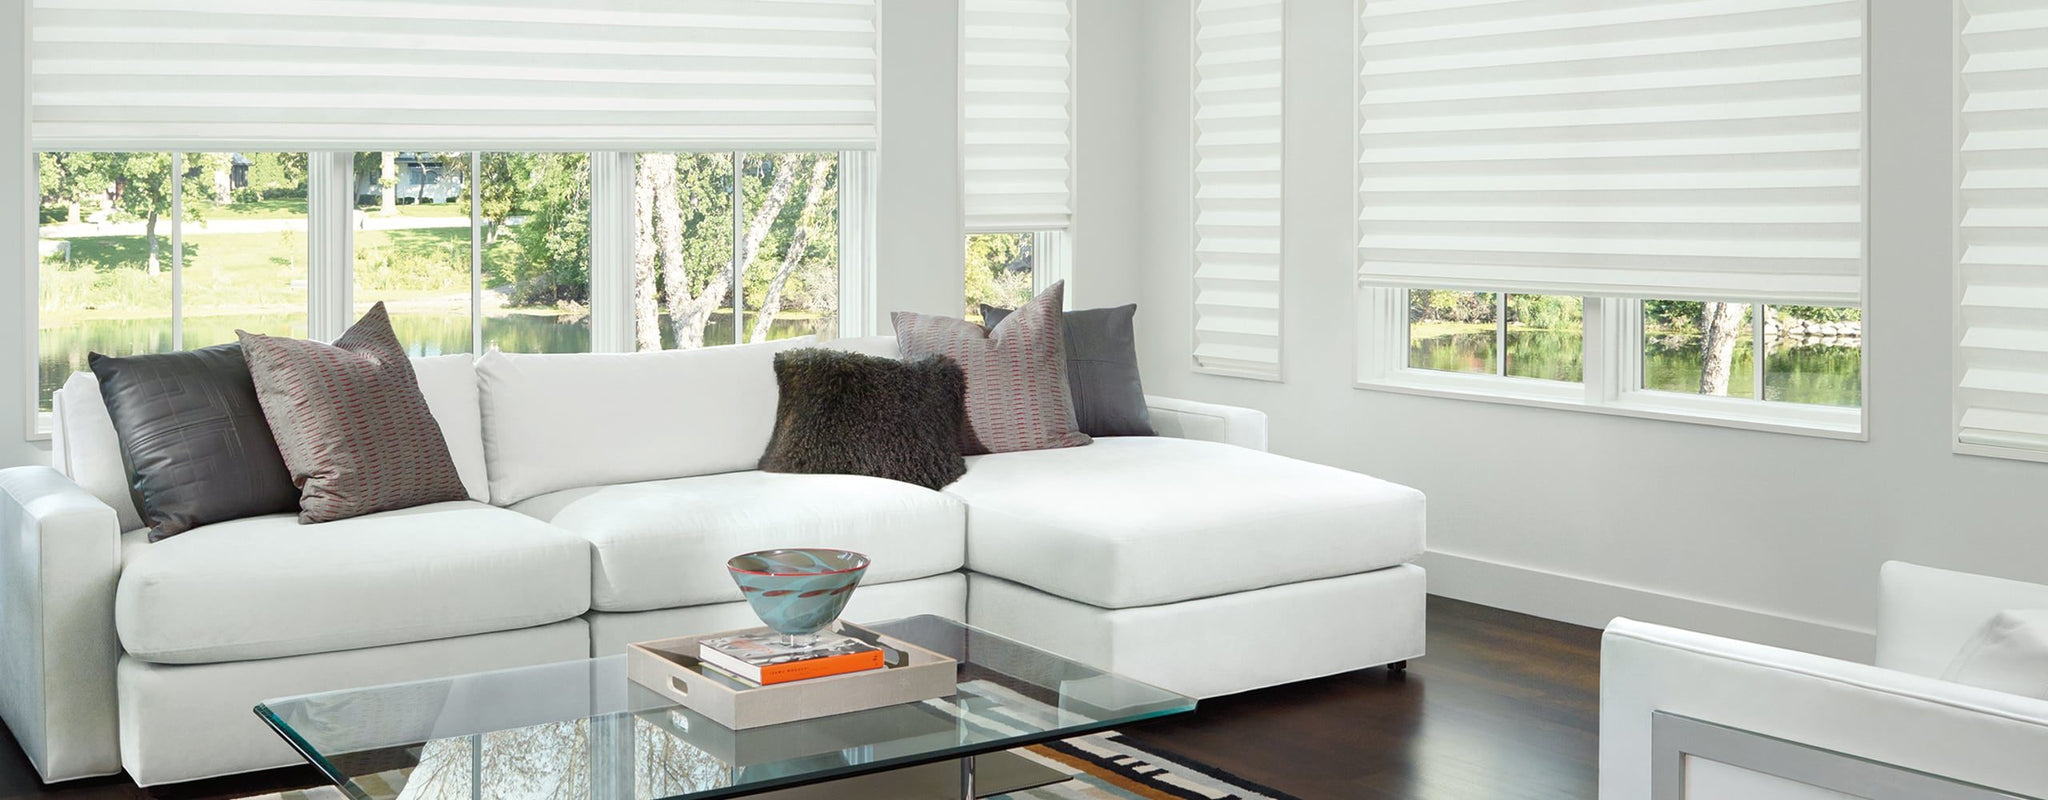 New Smart Blinds and Window Treatments